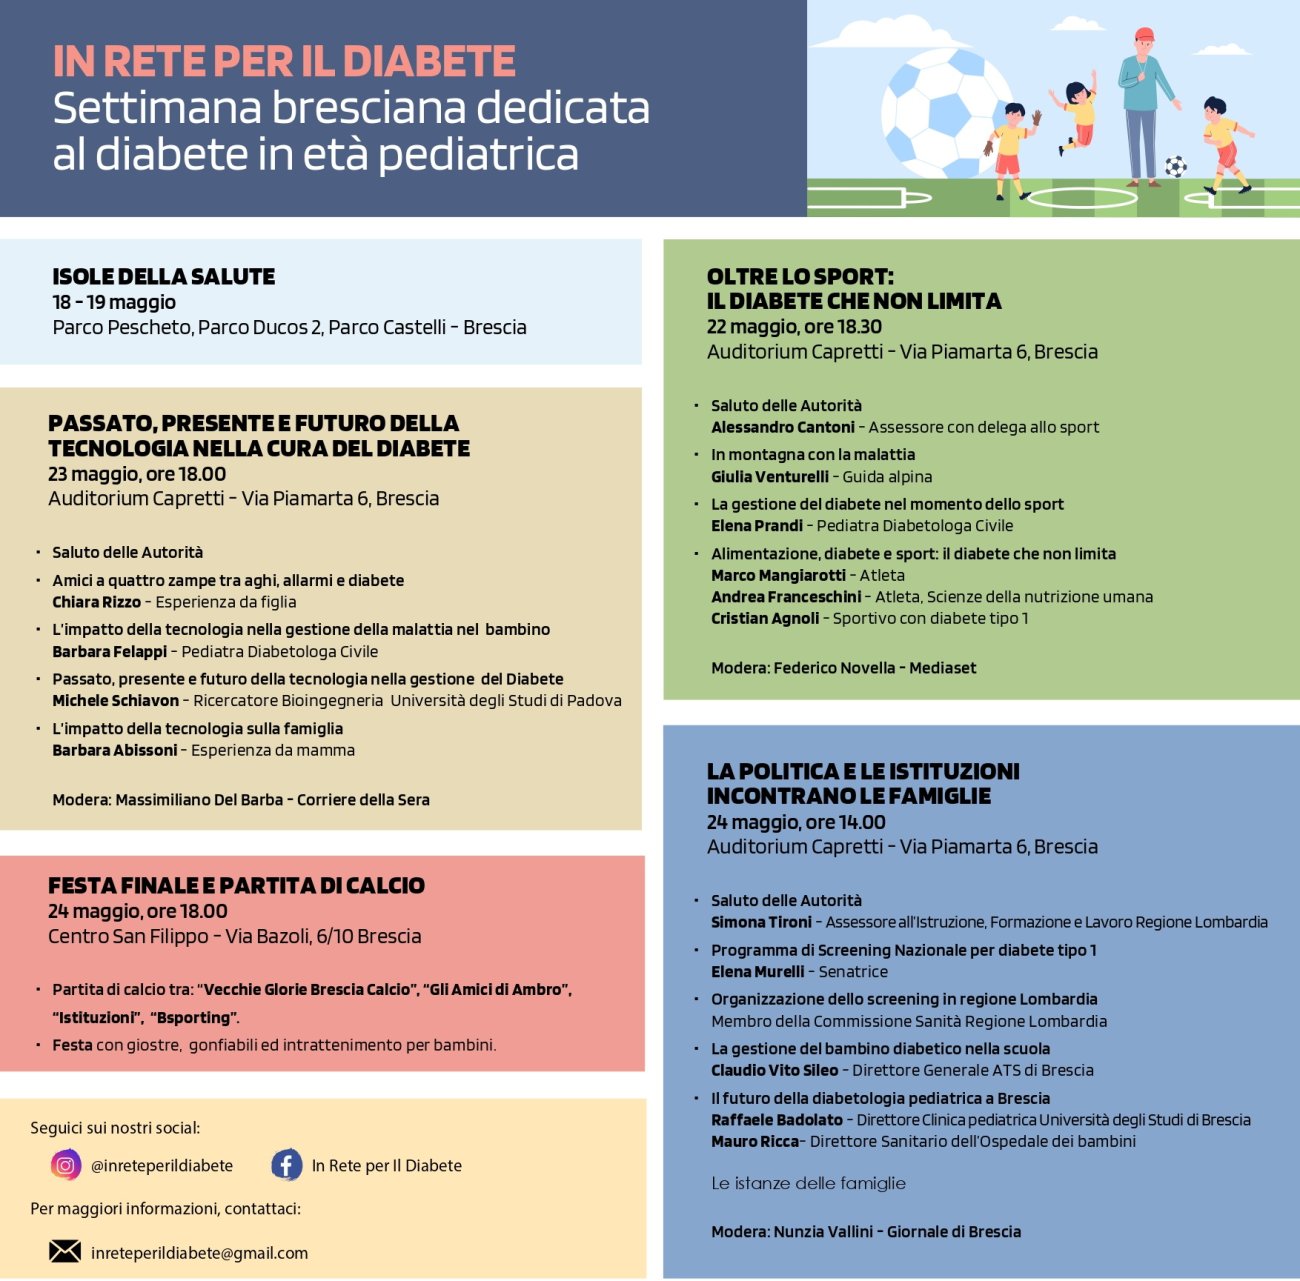 Cittadini spa support: "On the Net for Diabetes"